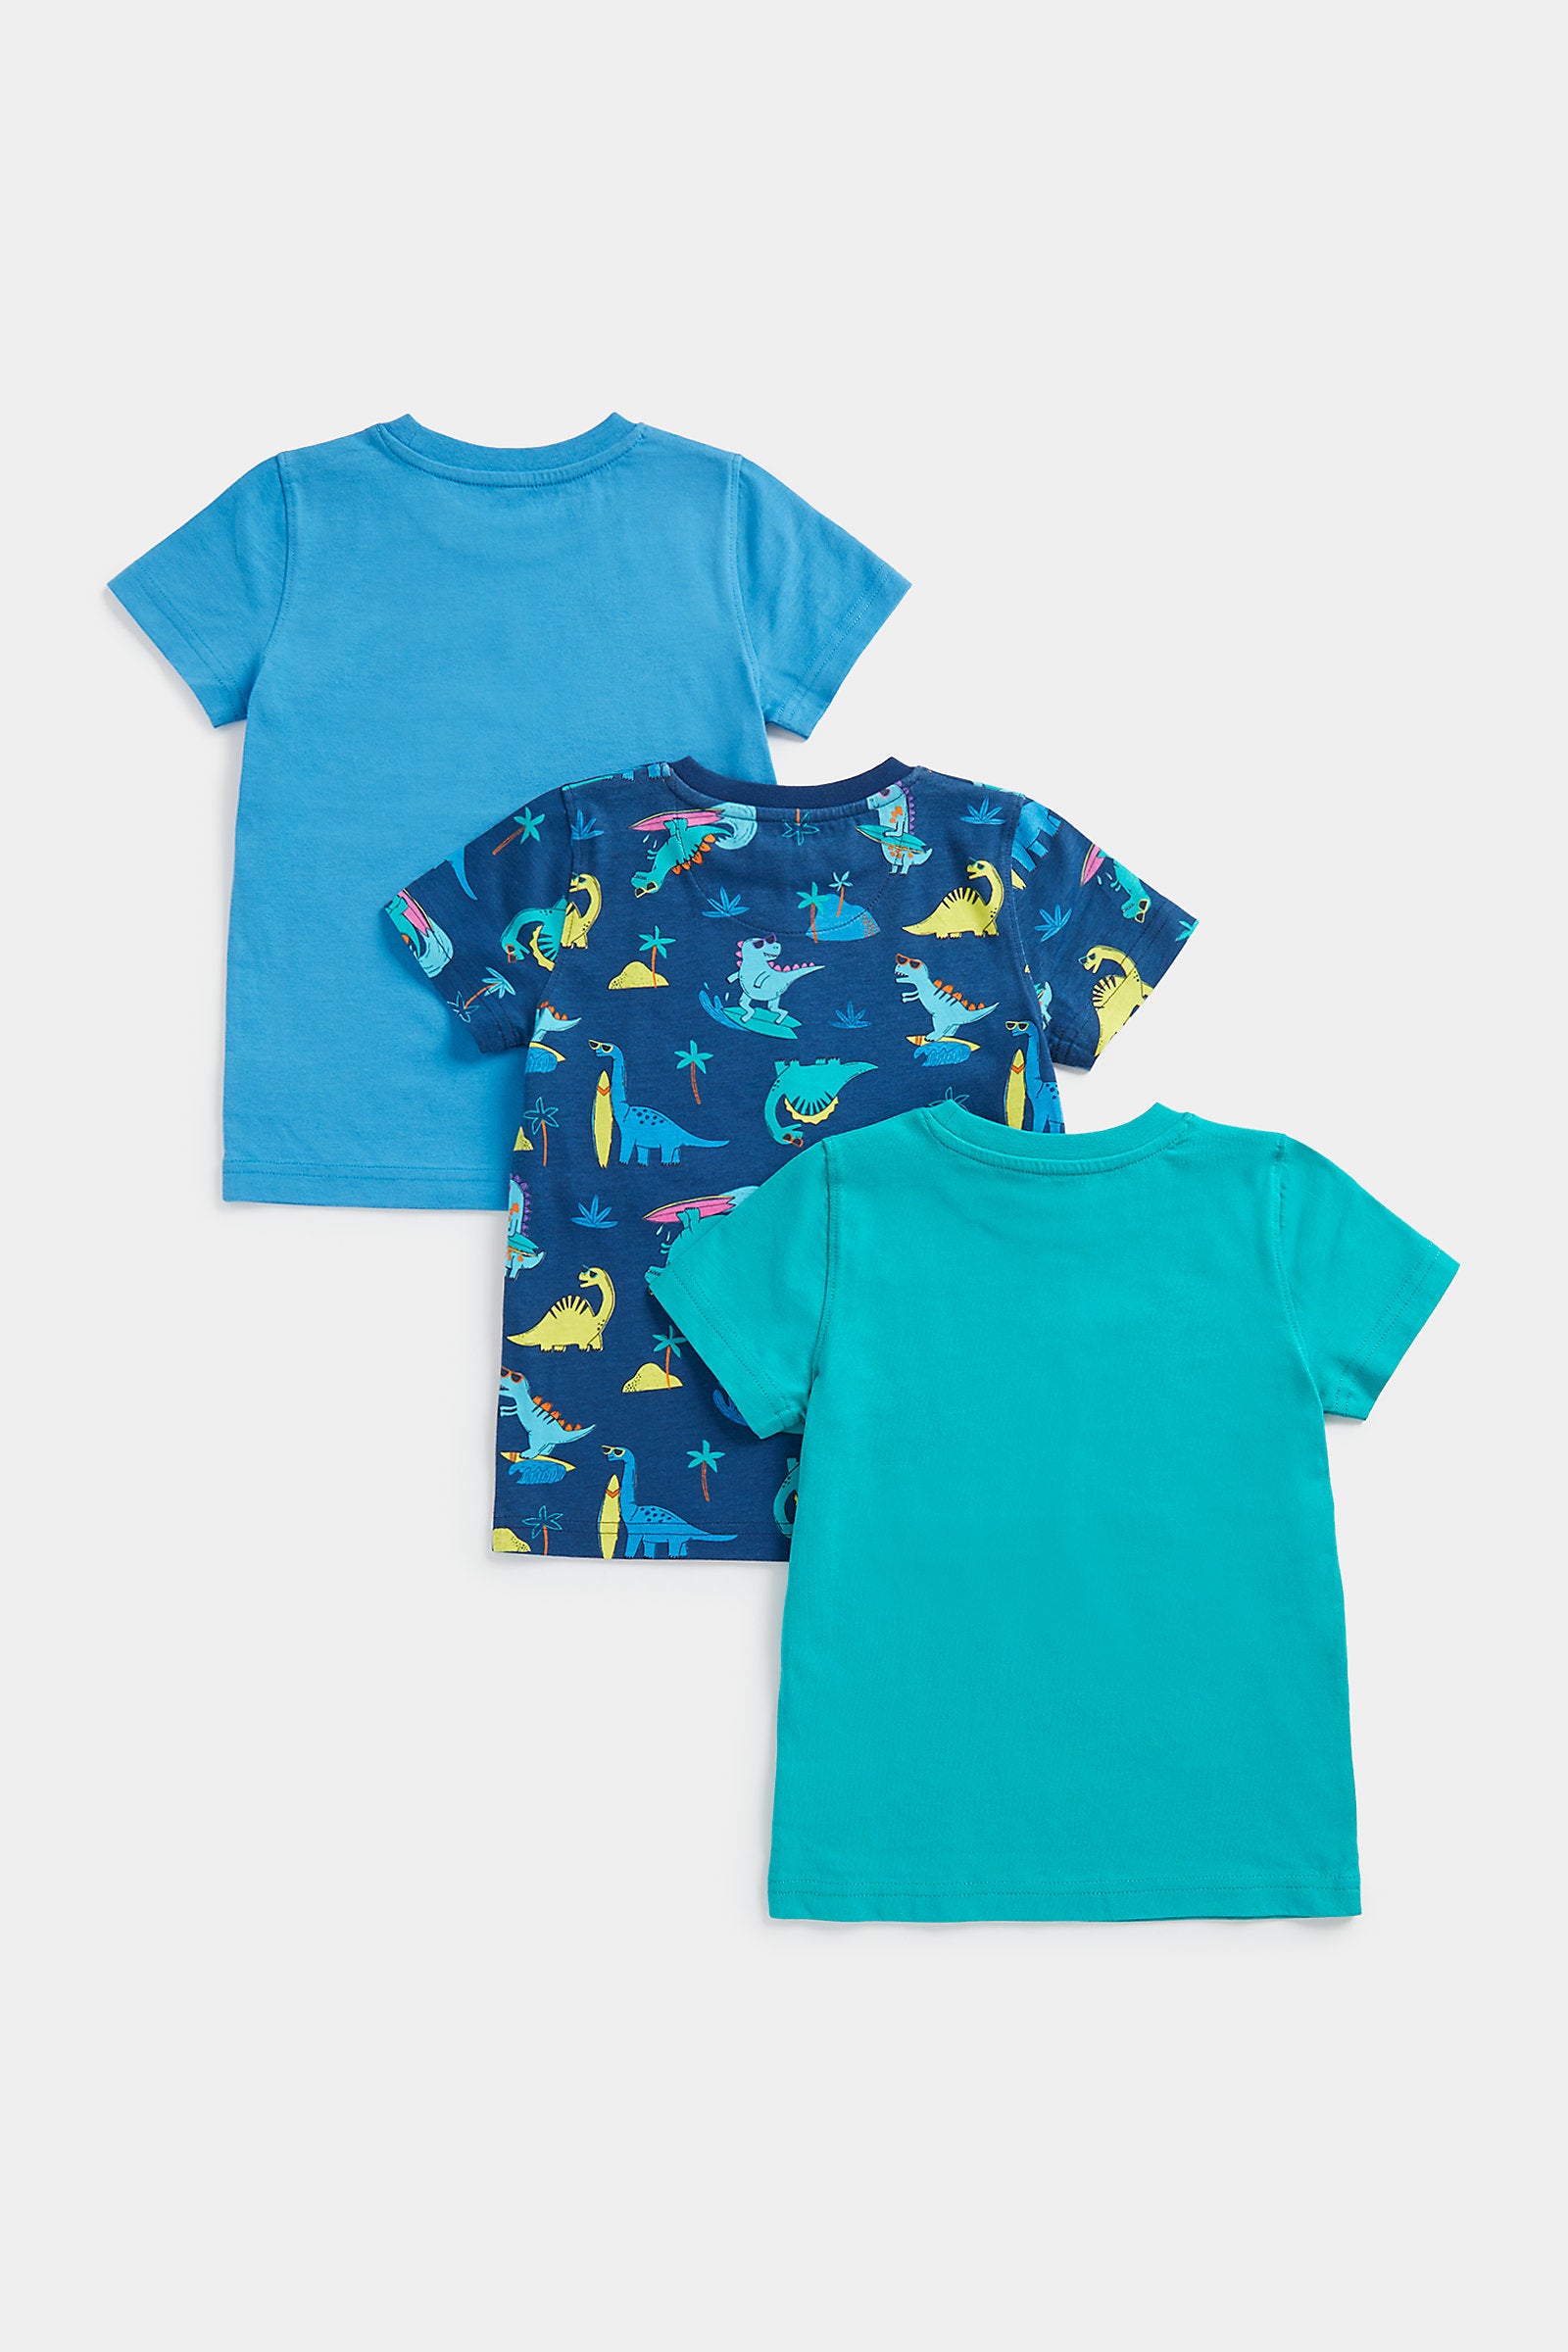 Mothercare Tropical Dino T-Shirts - 3 Pack